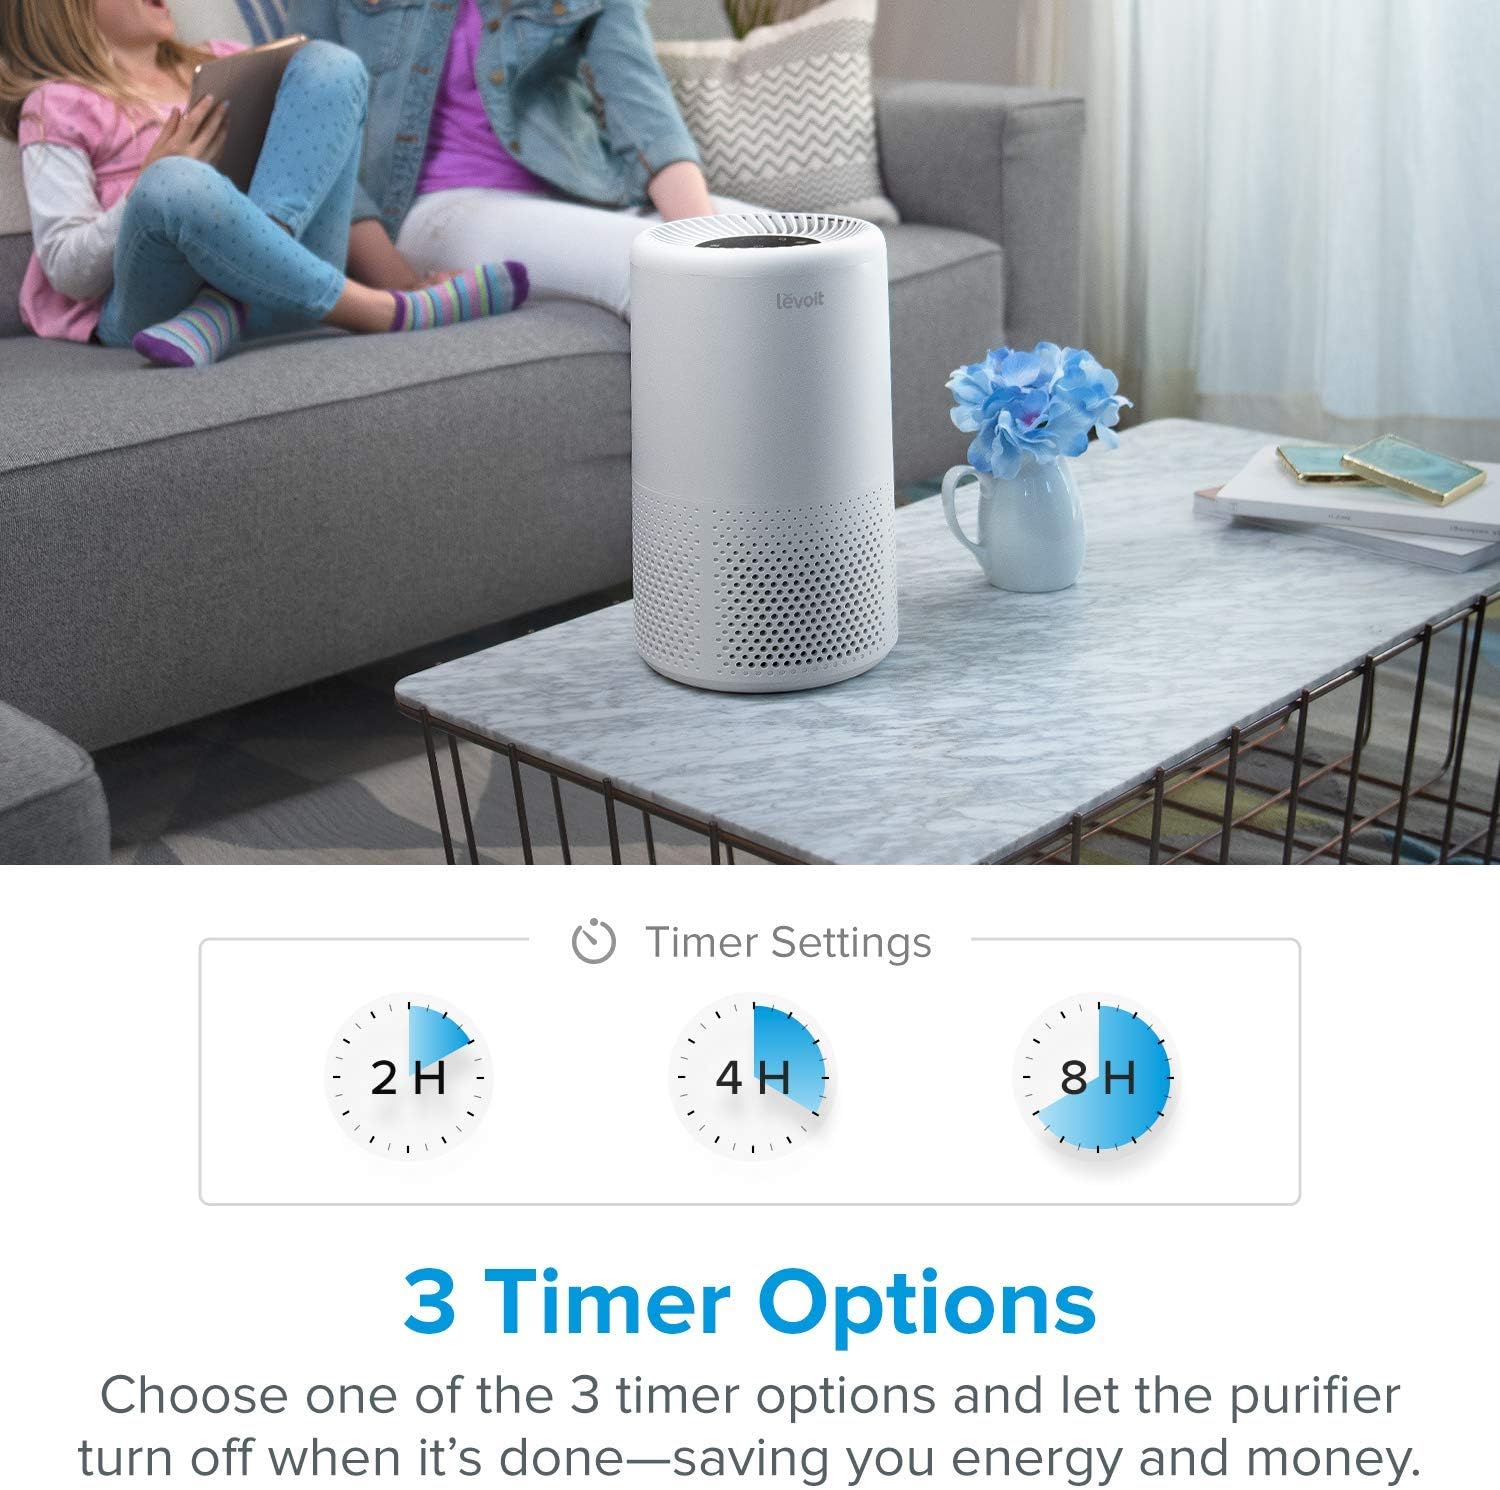  LEVOIT Air Purifier for Home Allergies Pets Hair in